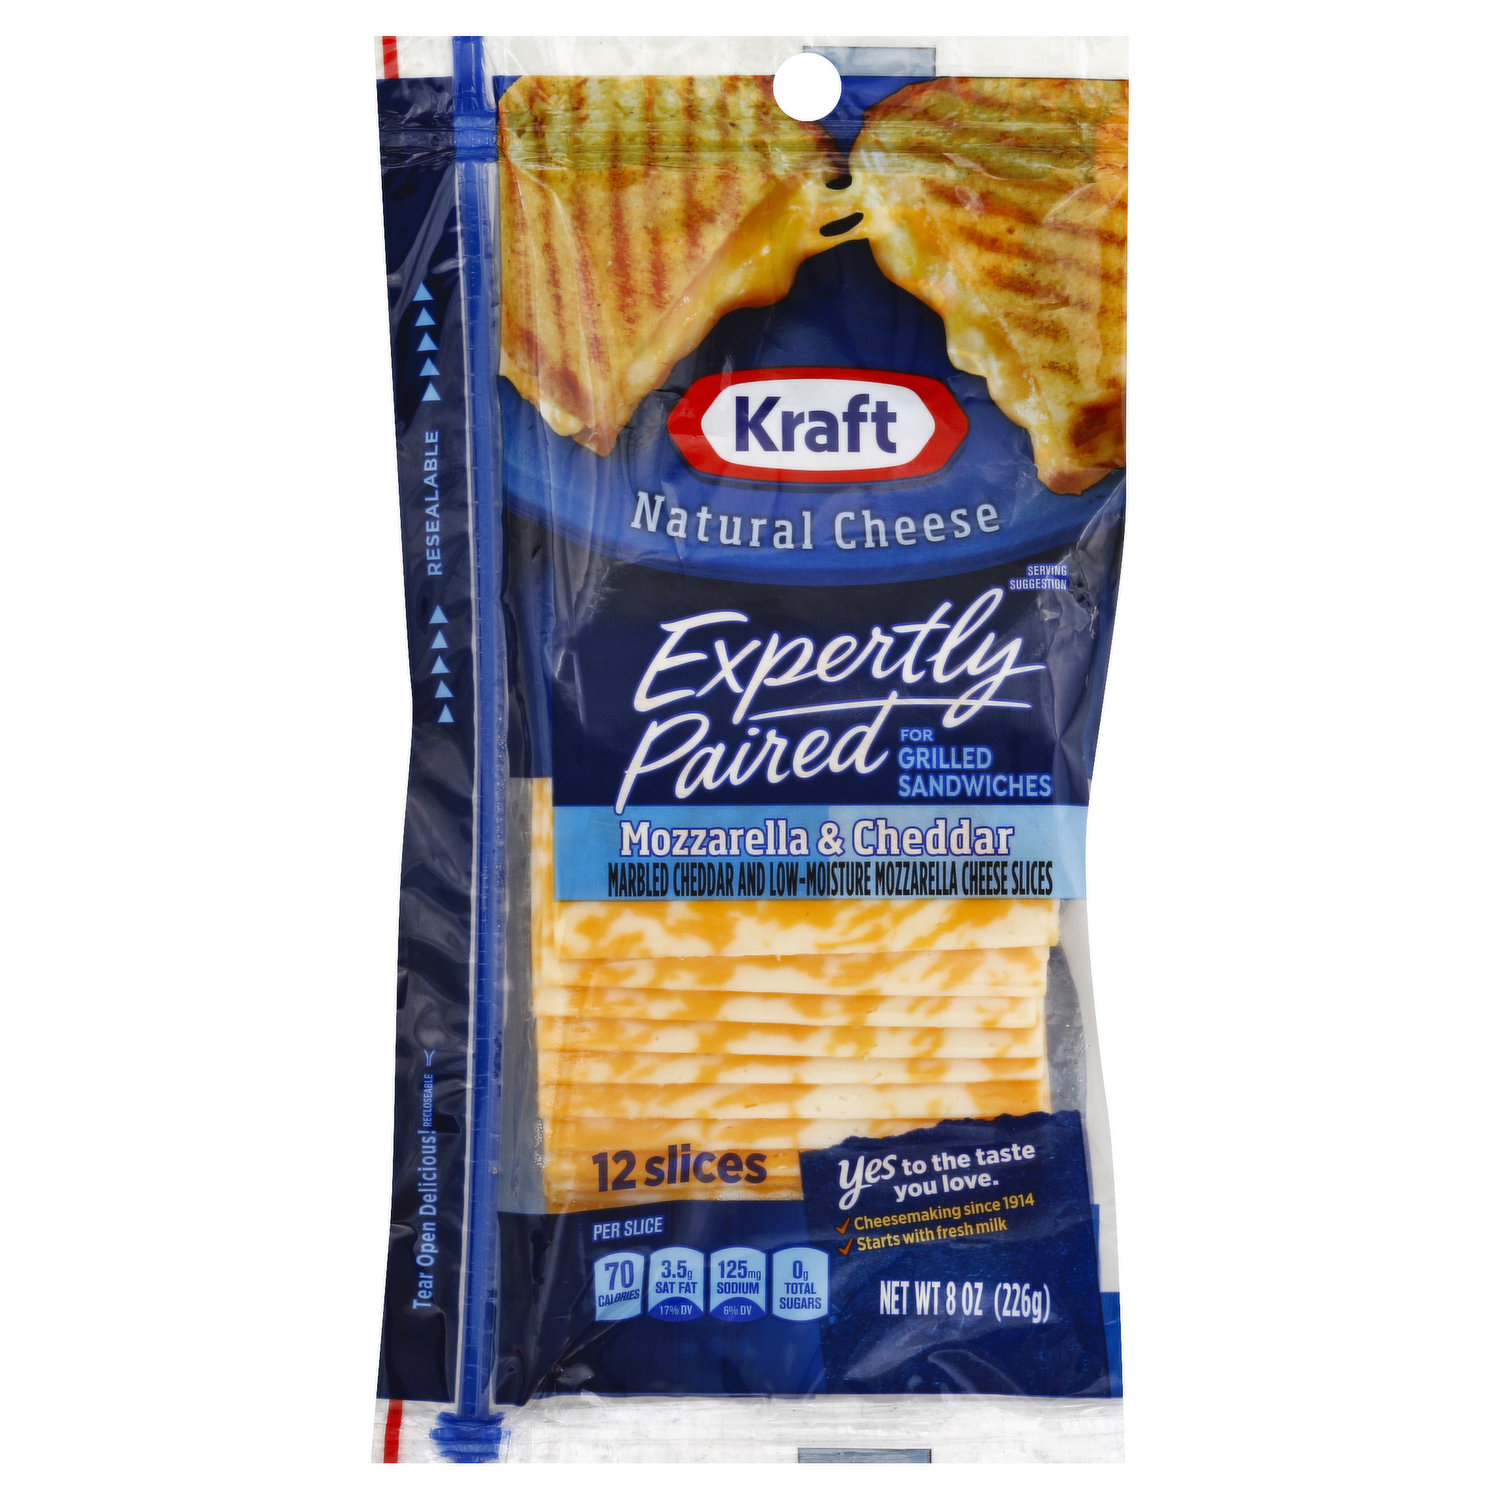 Expertly Frozen Foods - All Products